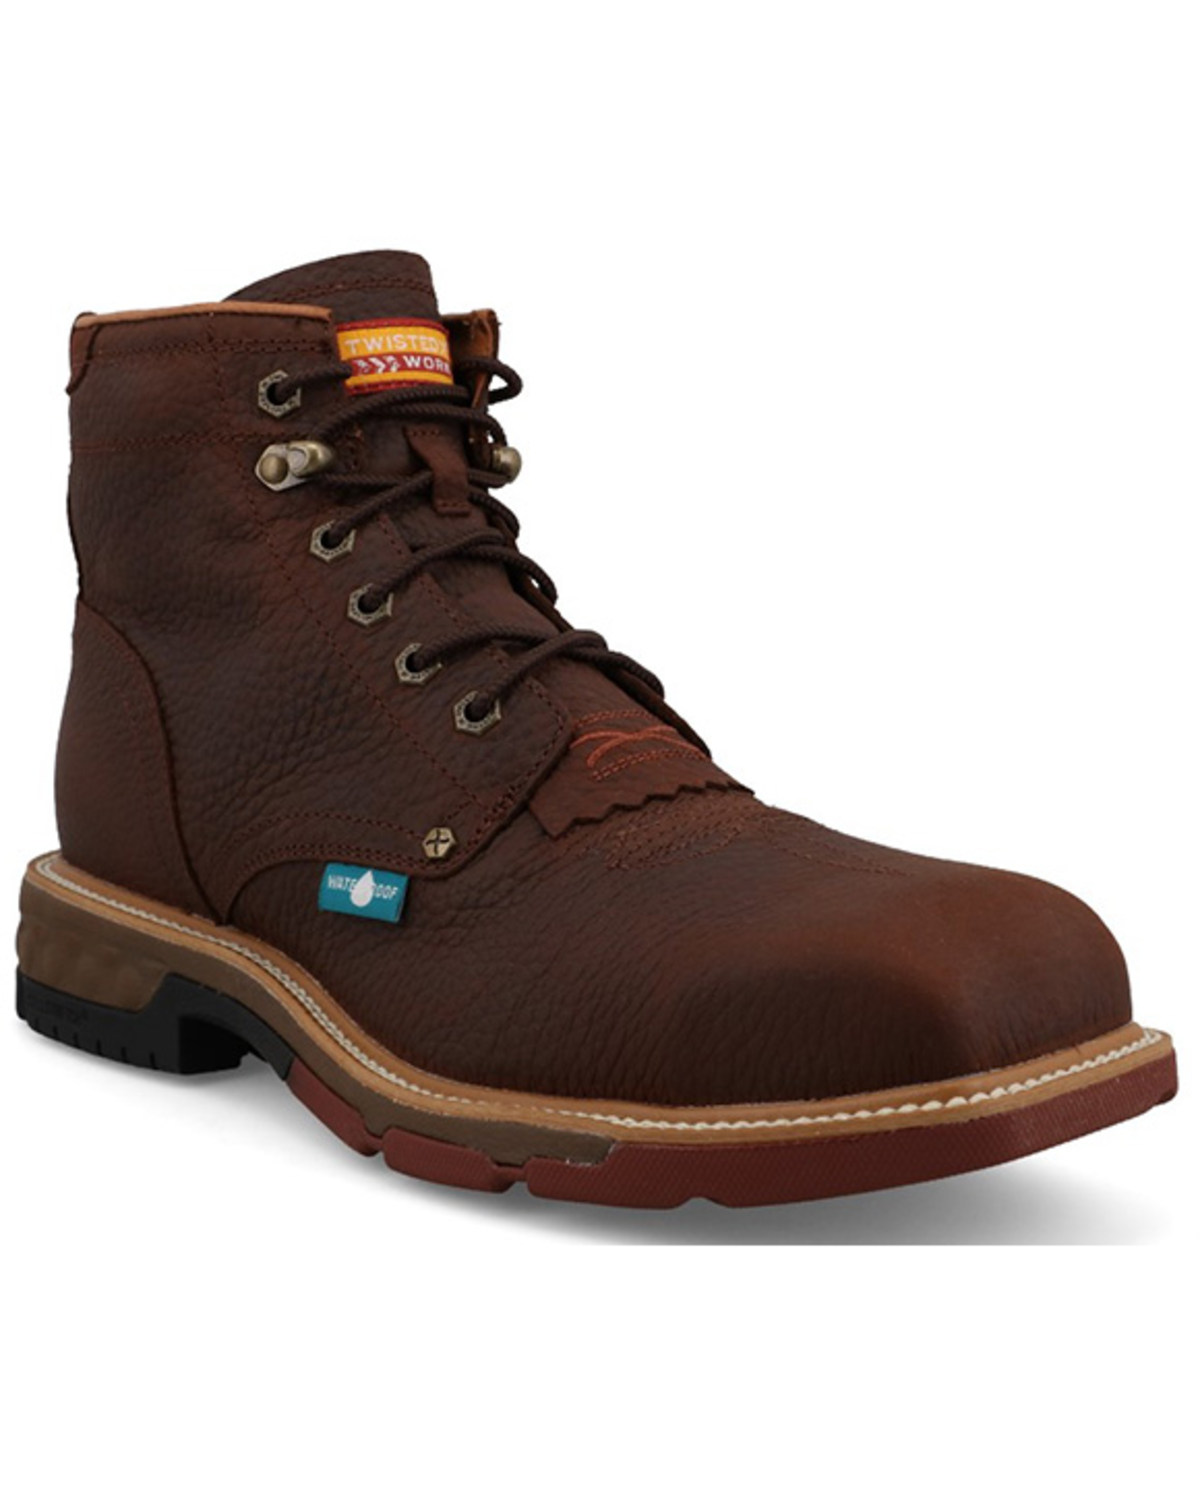 Twisted X Men's 6" CellStretch® Lacer Work Boots - Nano Toe